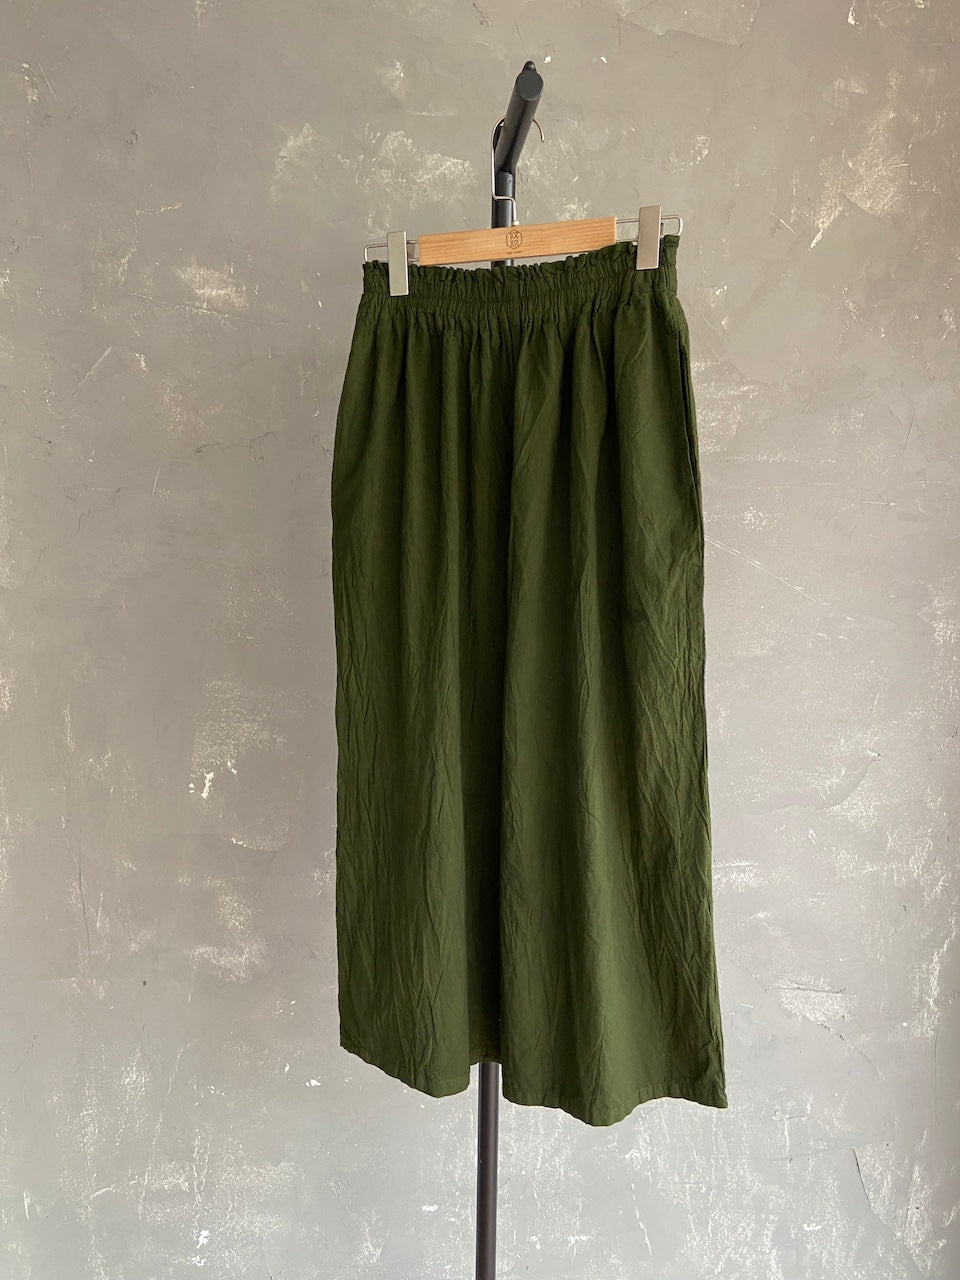 Hand Dyed Farmer's Pants in Deep Green #33